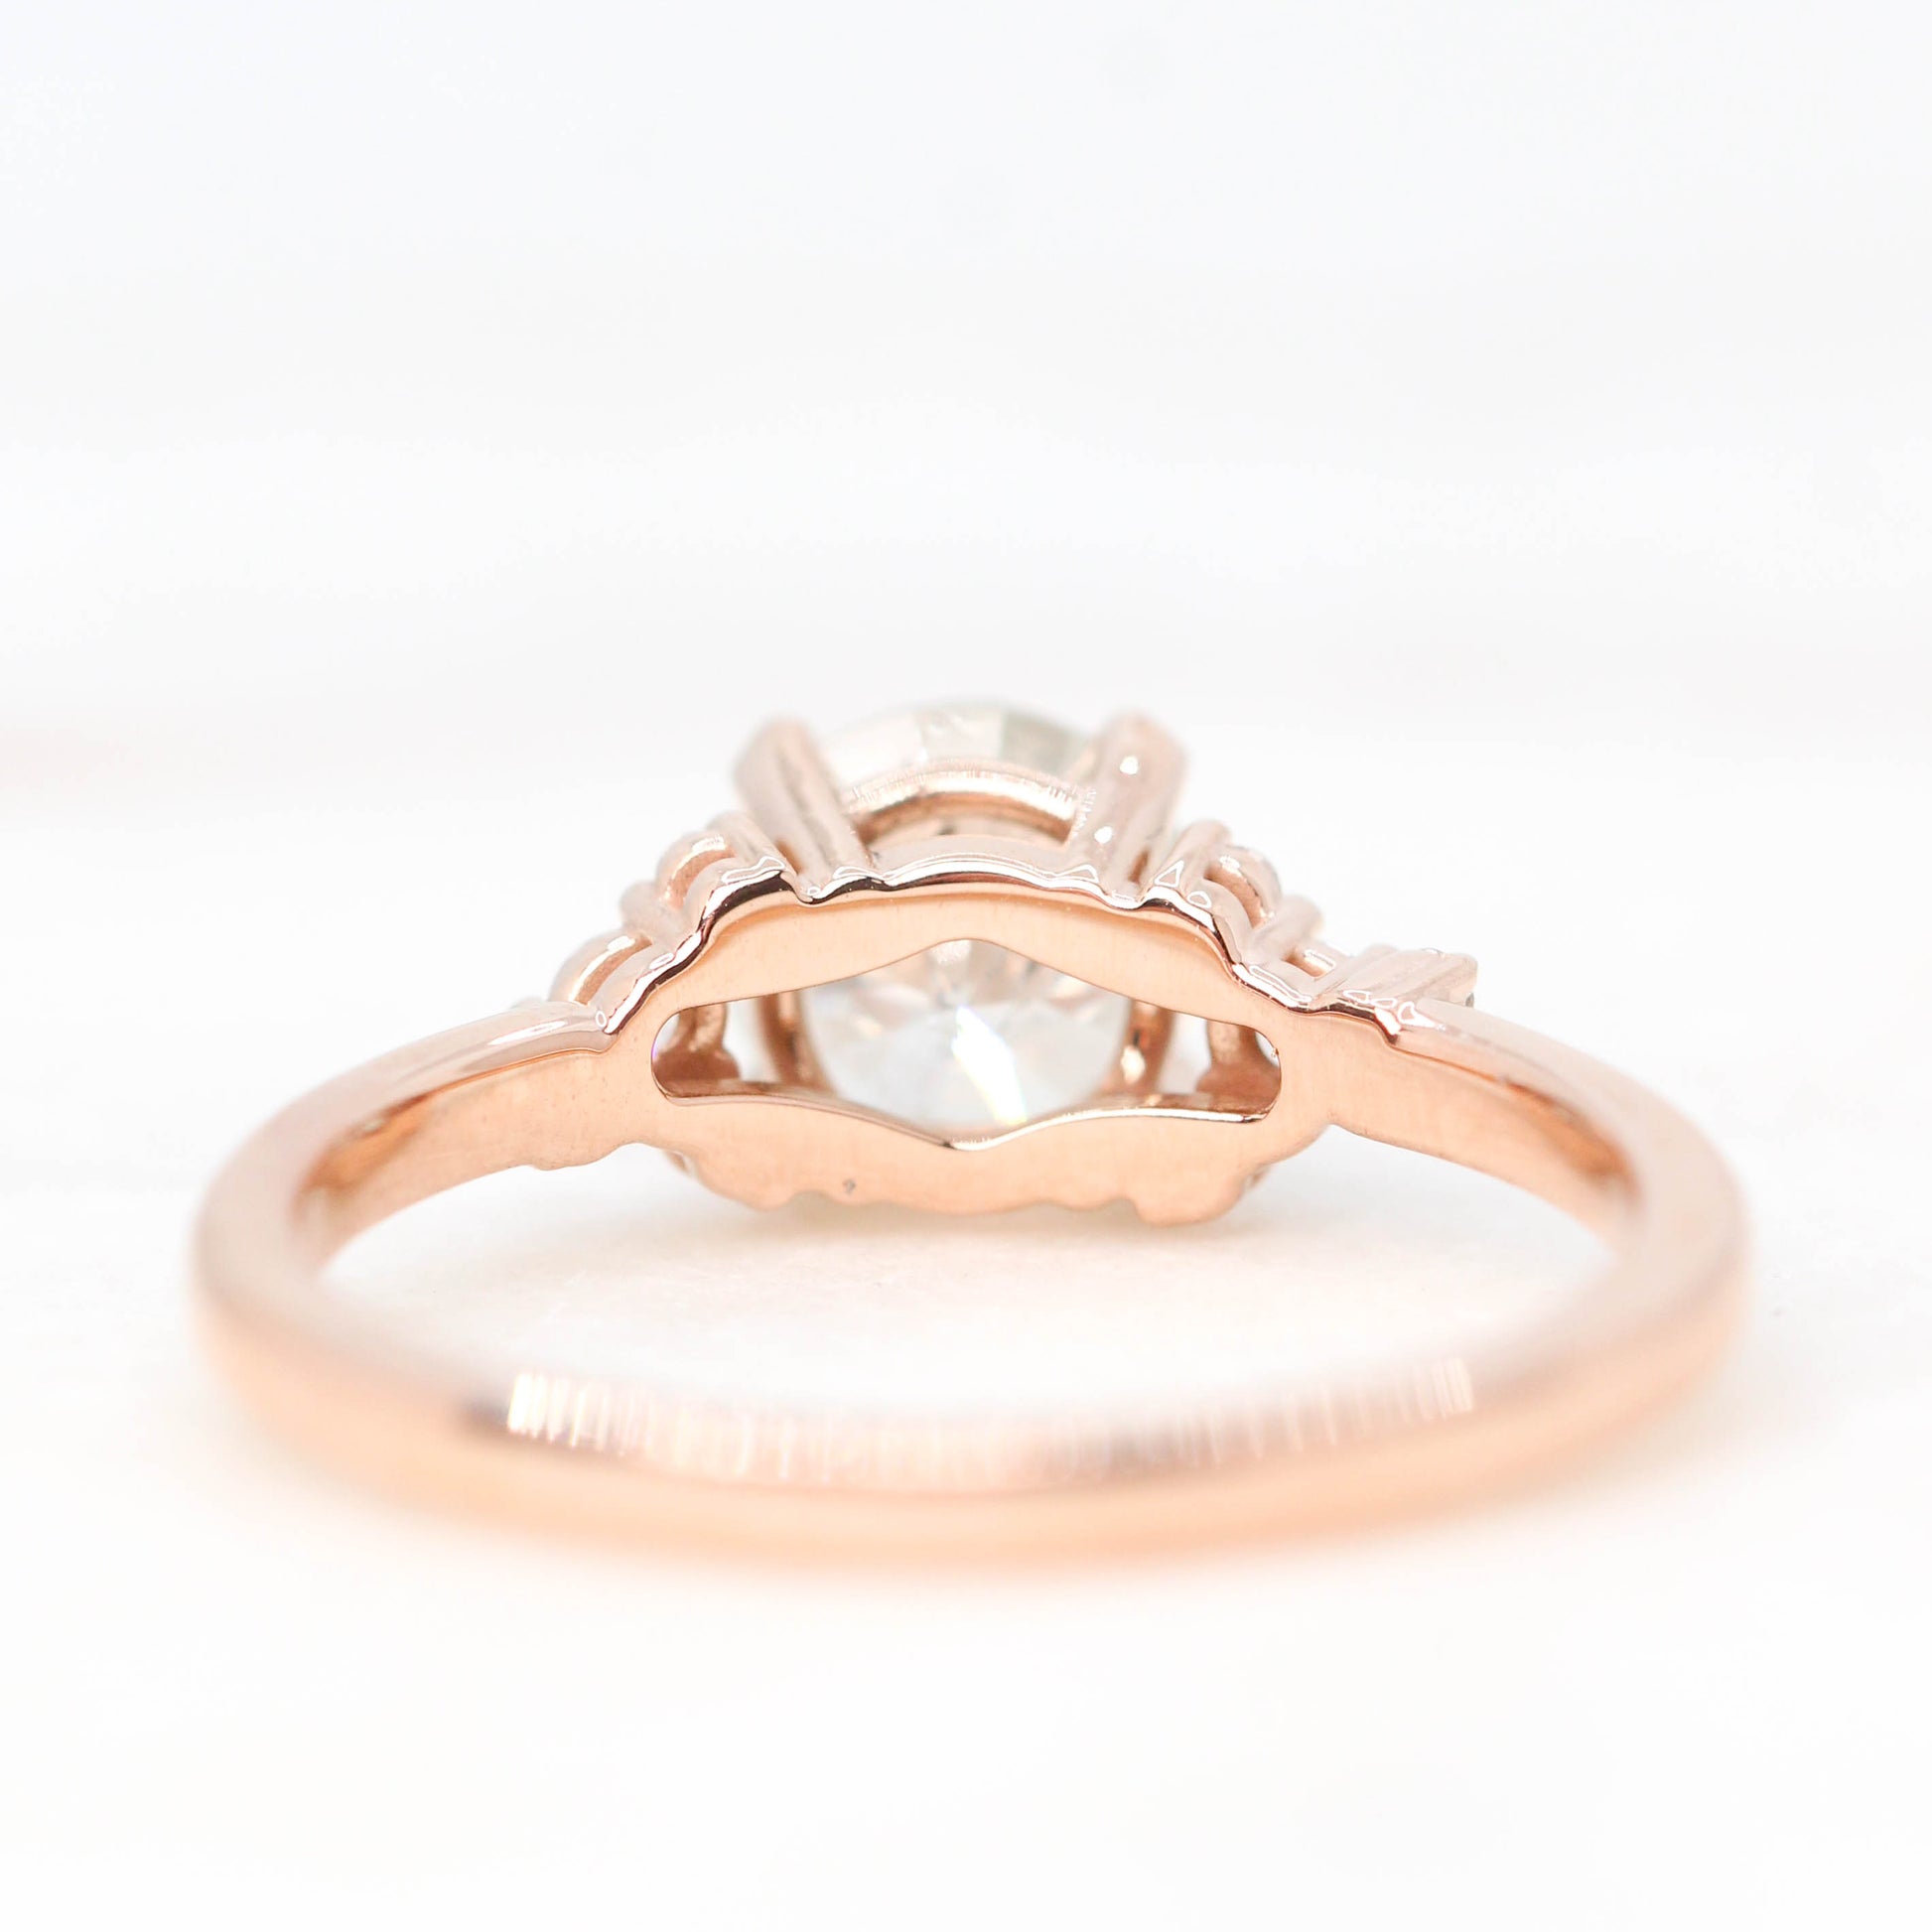 Marley Ring with a 1.05 Carat White Celestial Round Diamond and White Accent Diamonds in 14k Rose Gold - Ready to Size and Ship - Midwinter Co. Alternative Bridal Rings and Modern Fine Jewelry